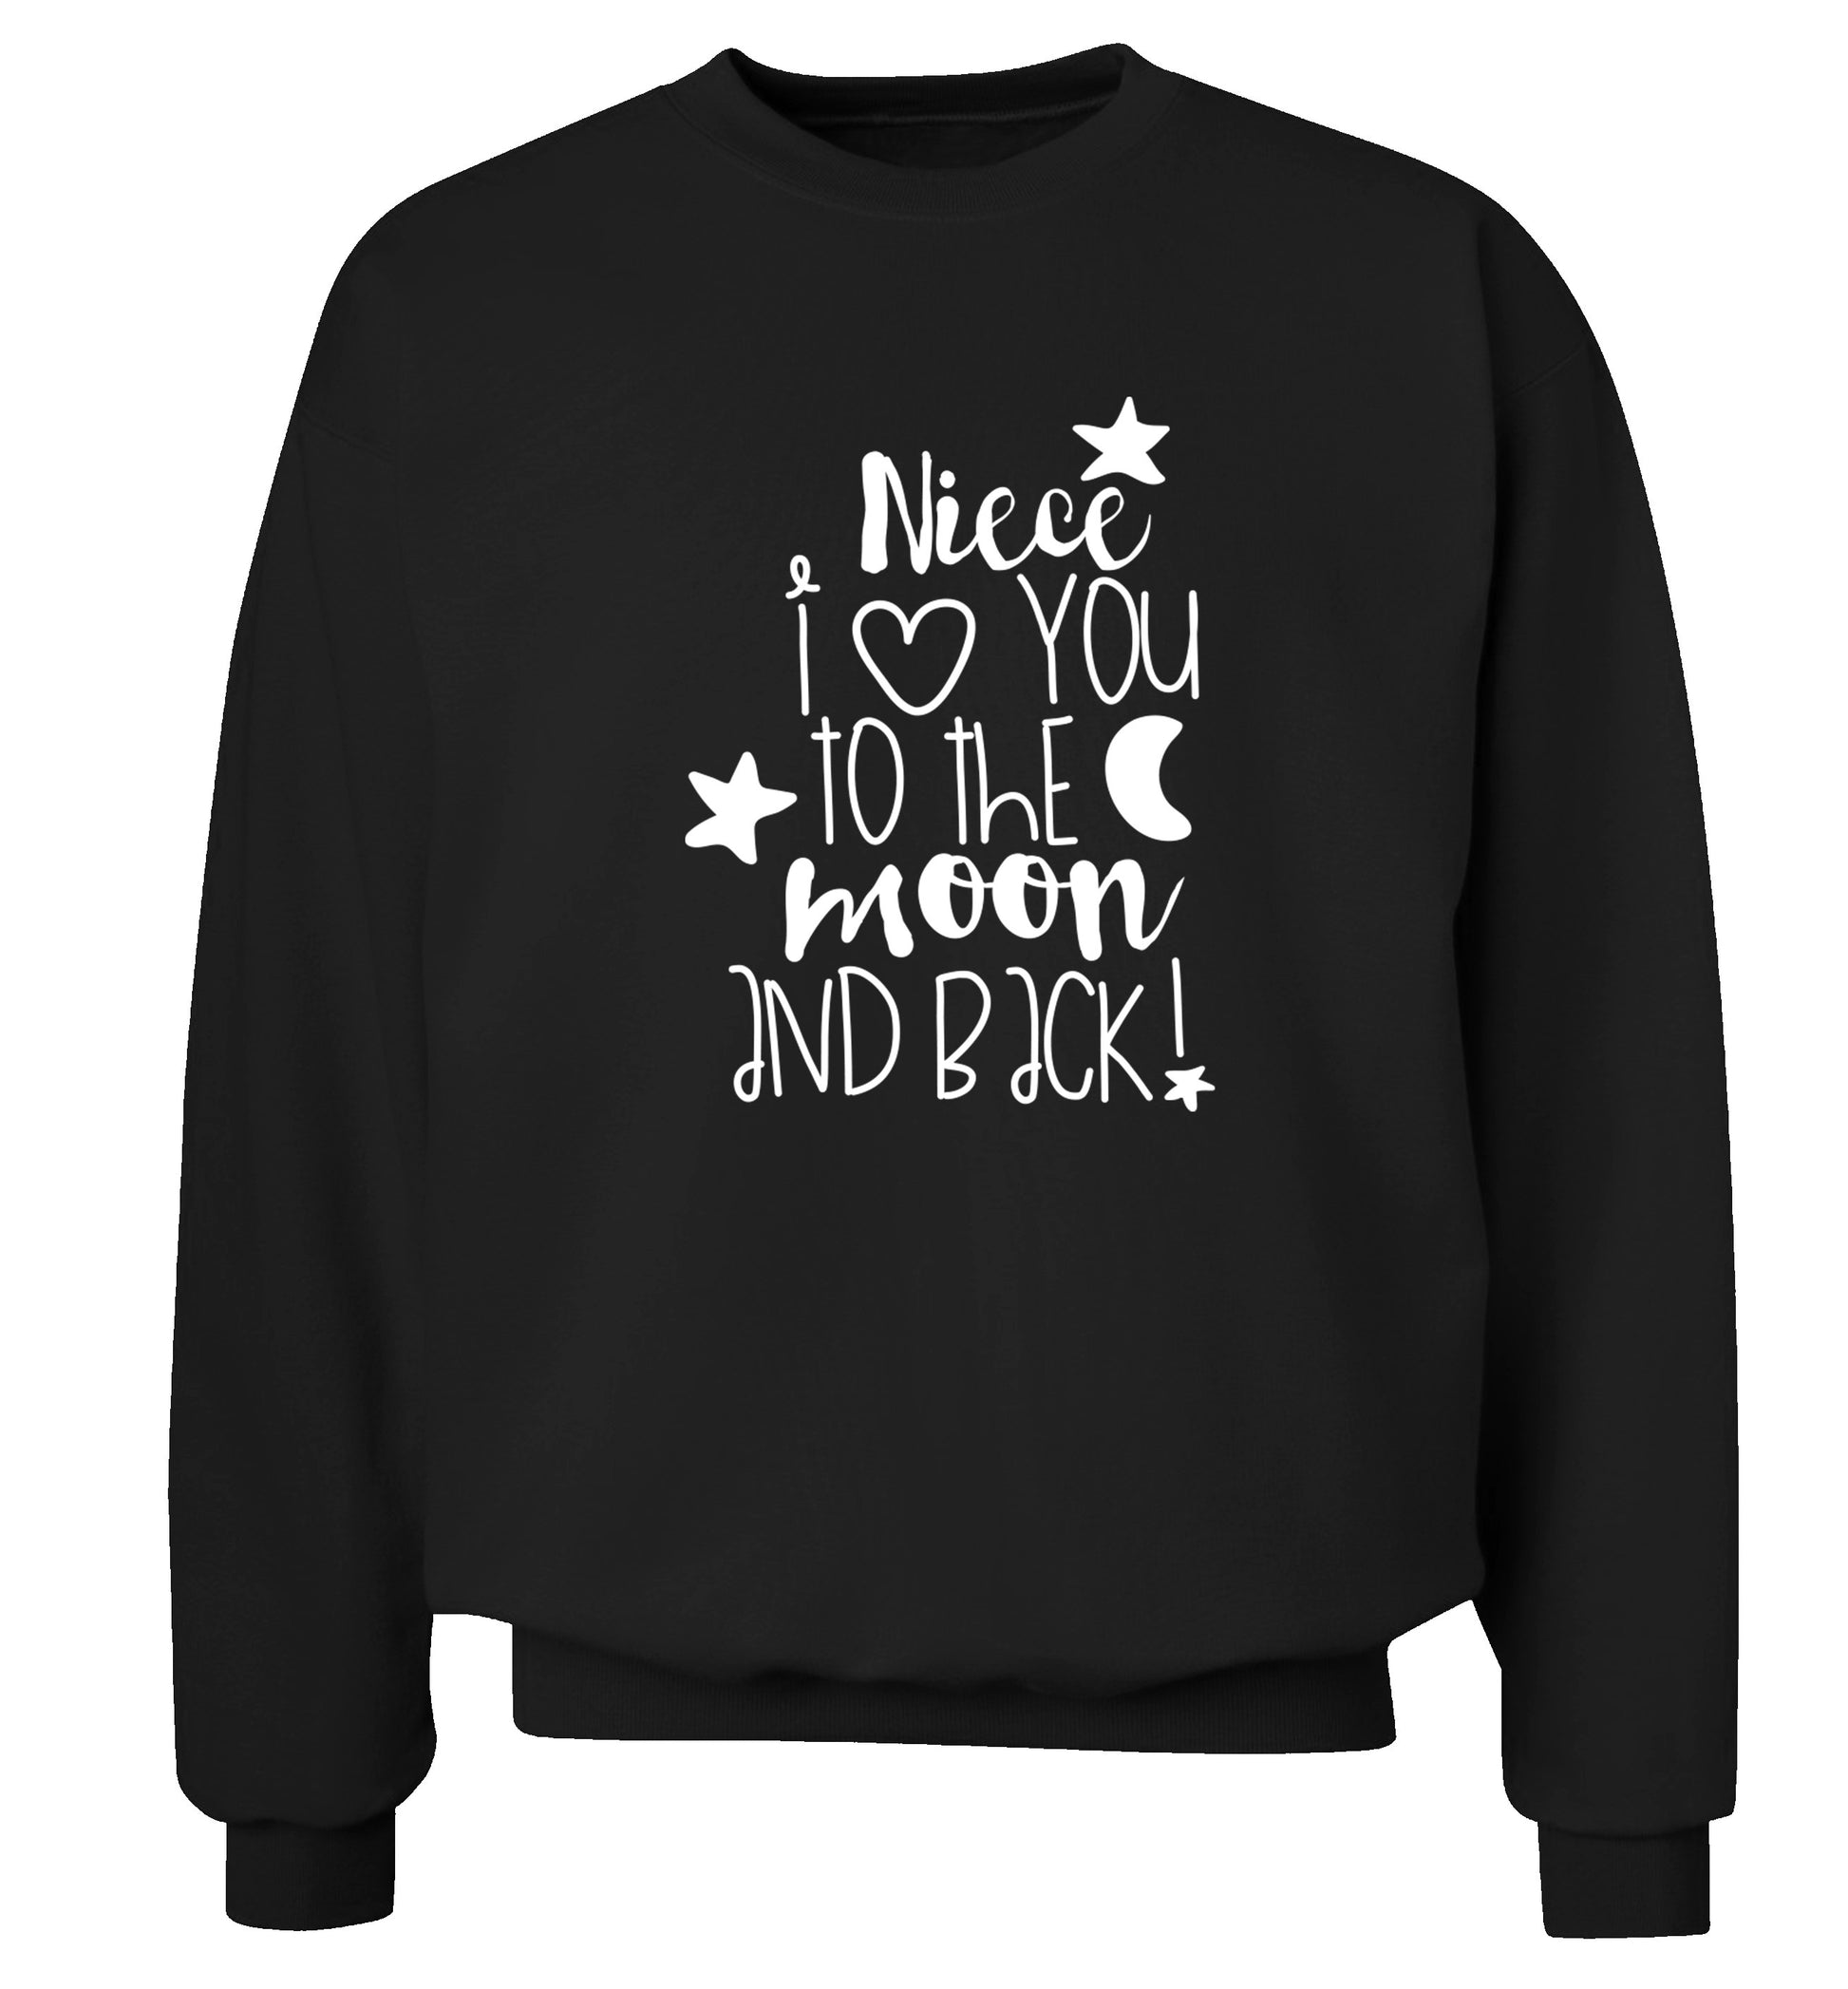 Niece I love you to the moon and back Adult's unisex black  sweater 2XL